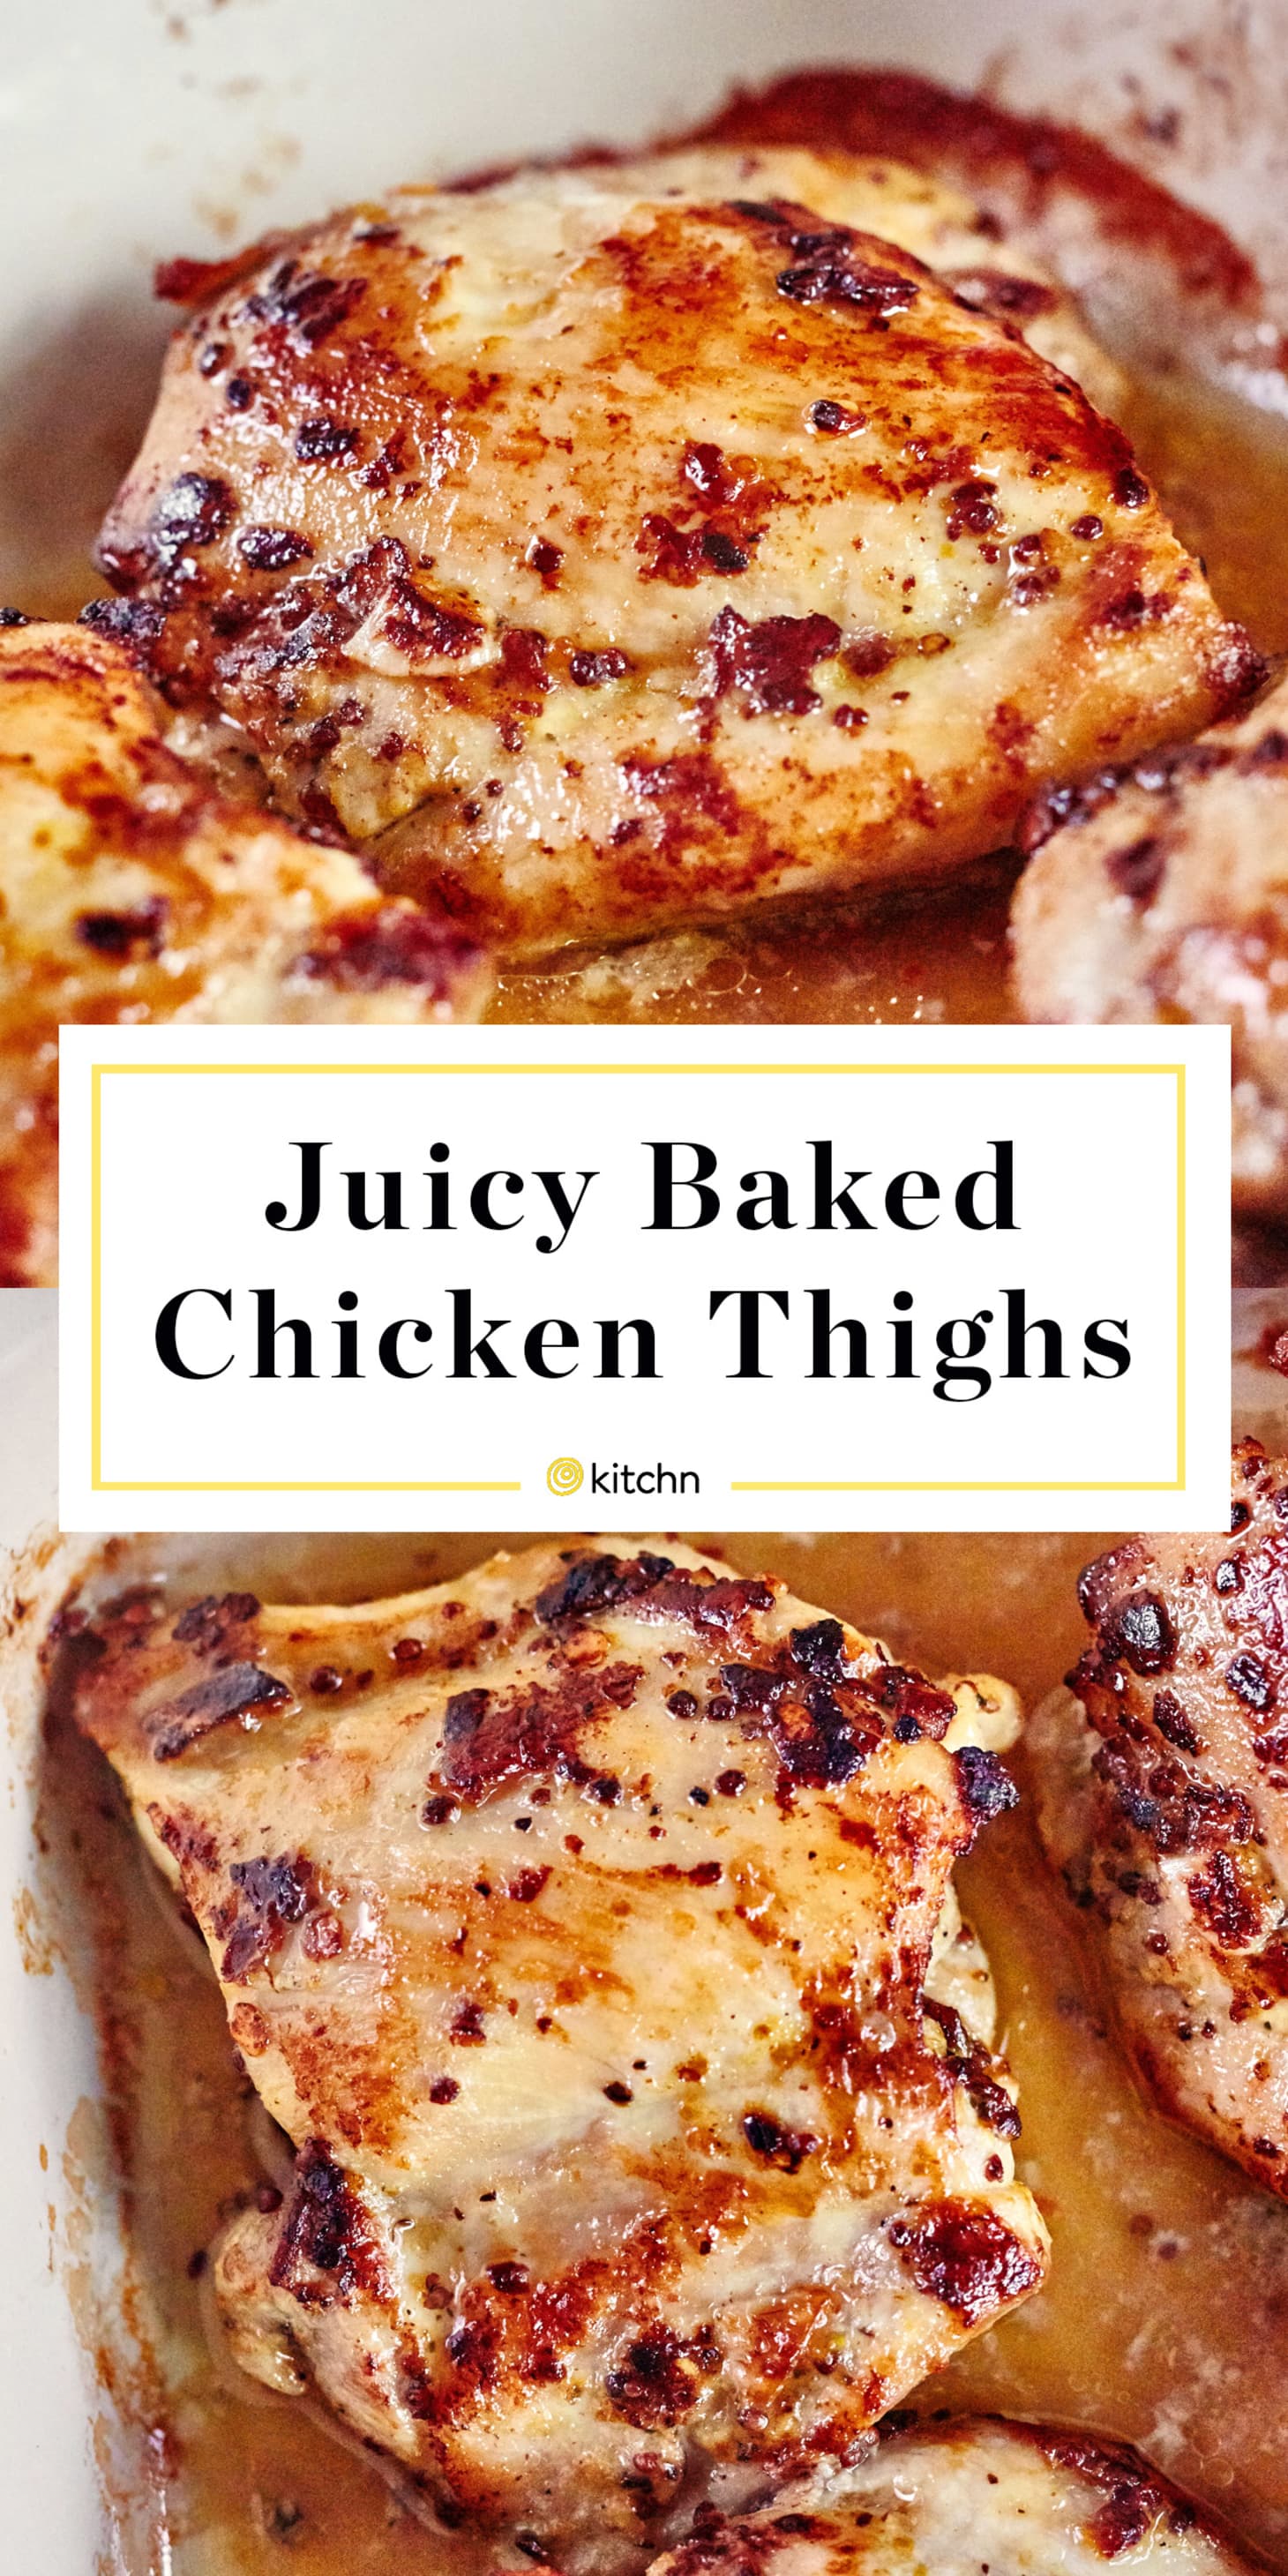 How To Cook Boneless Skinless Chicken Thighs In The Oven Kitchn